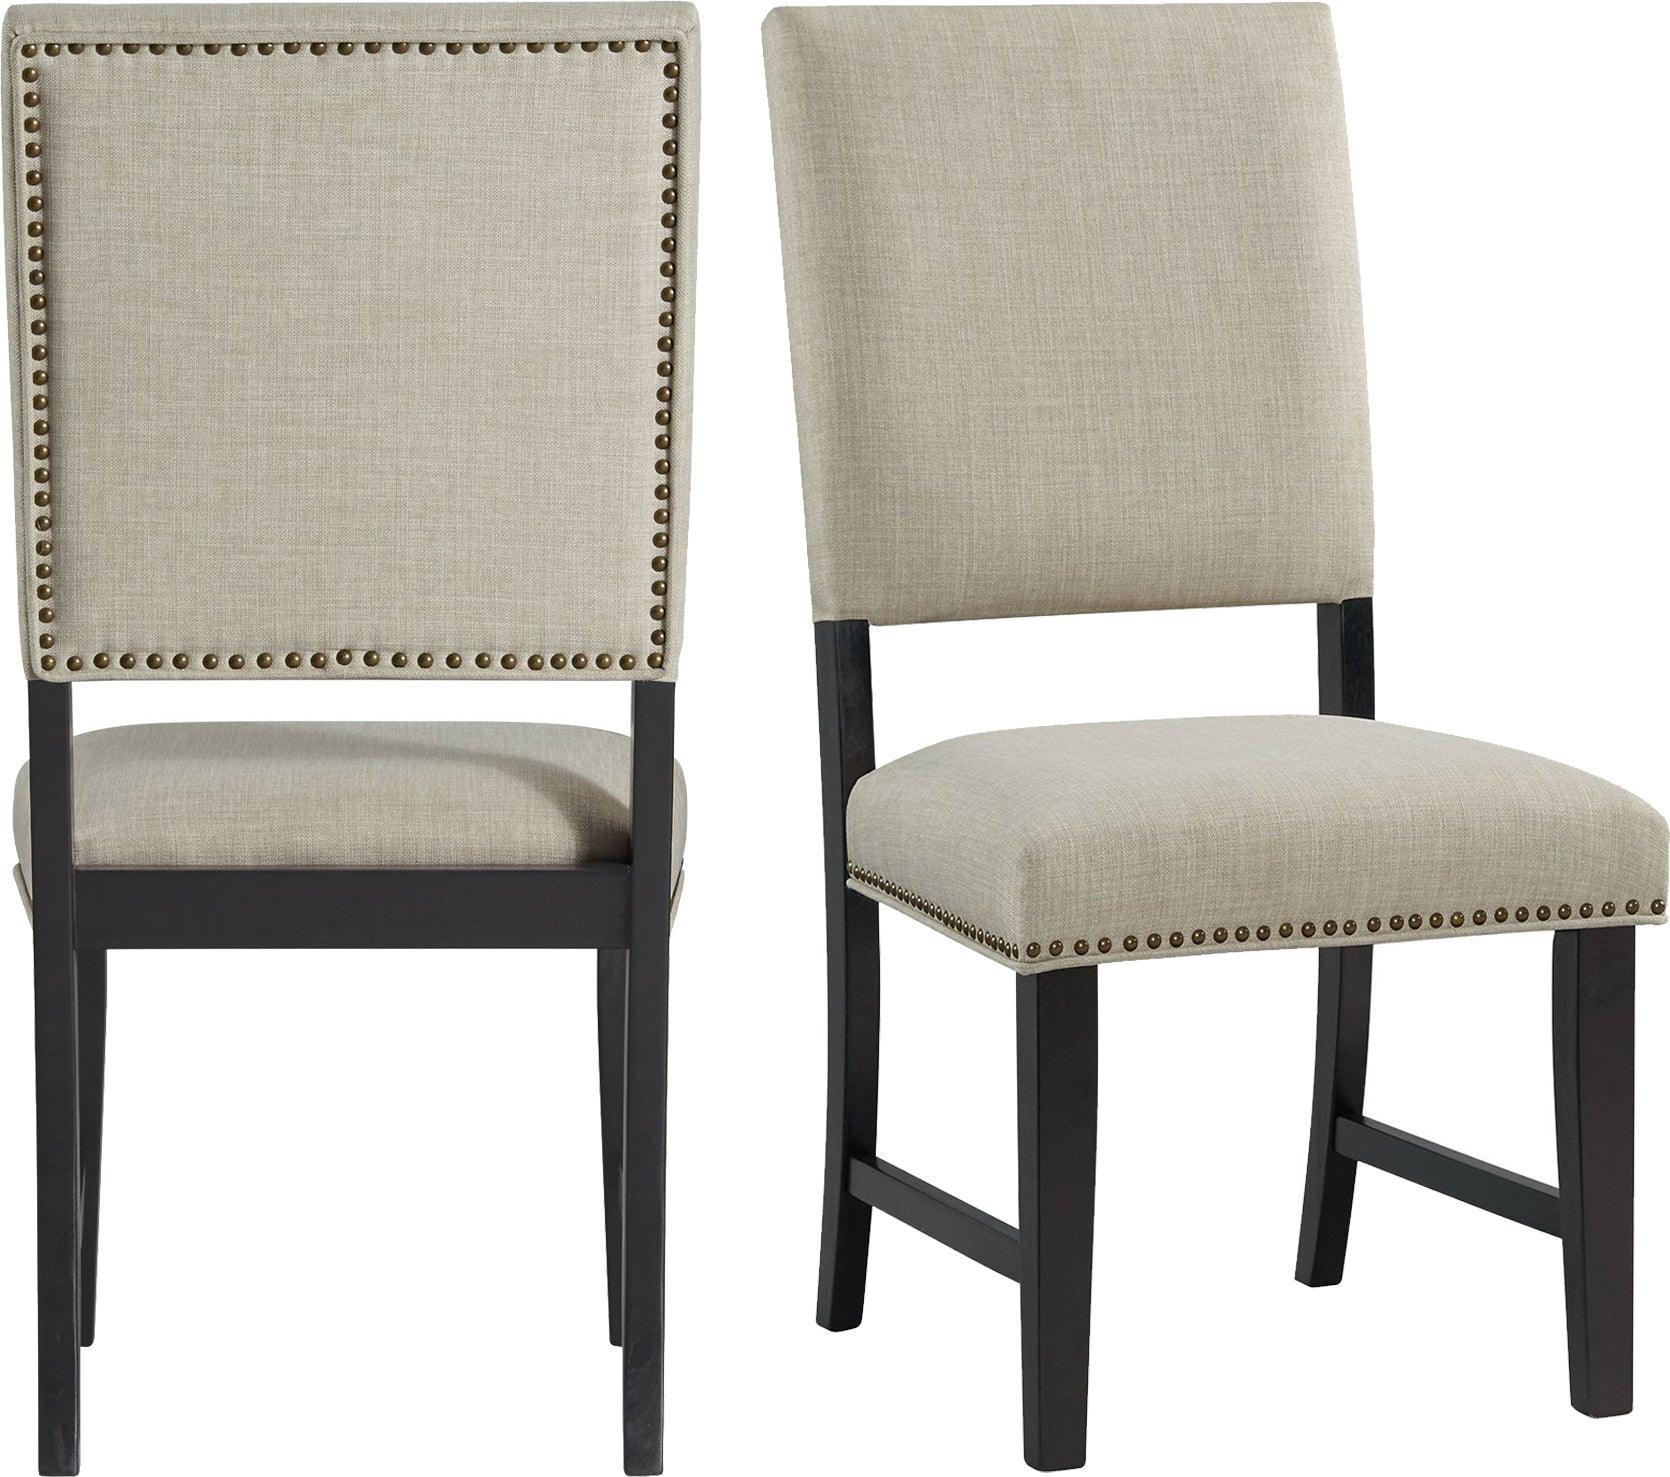 Elements Dining Chairs - Mara Upholstered Side Chair Set (Set of 2)